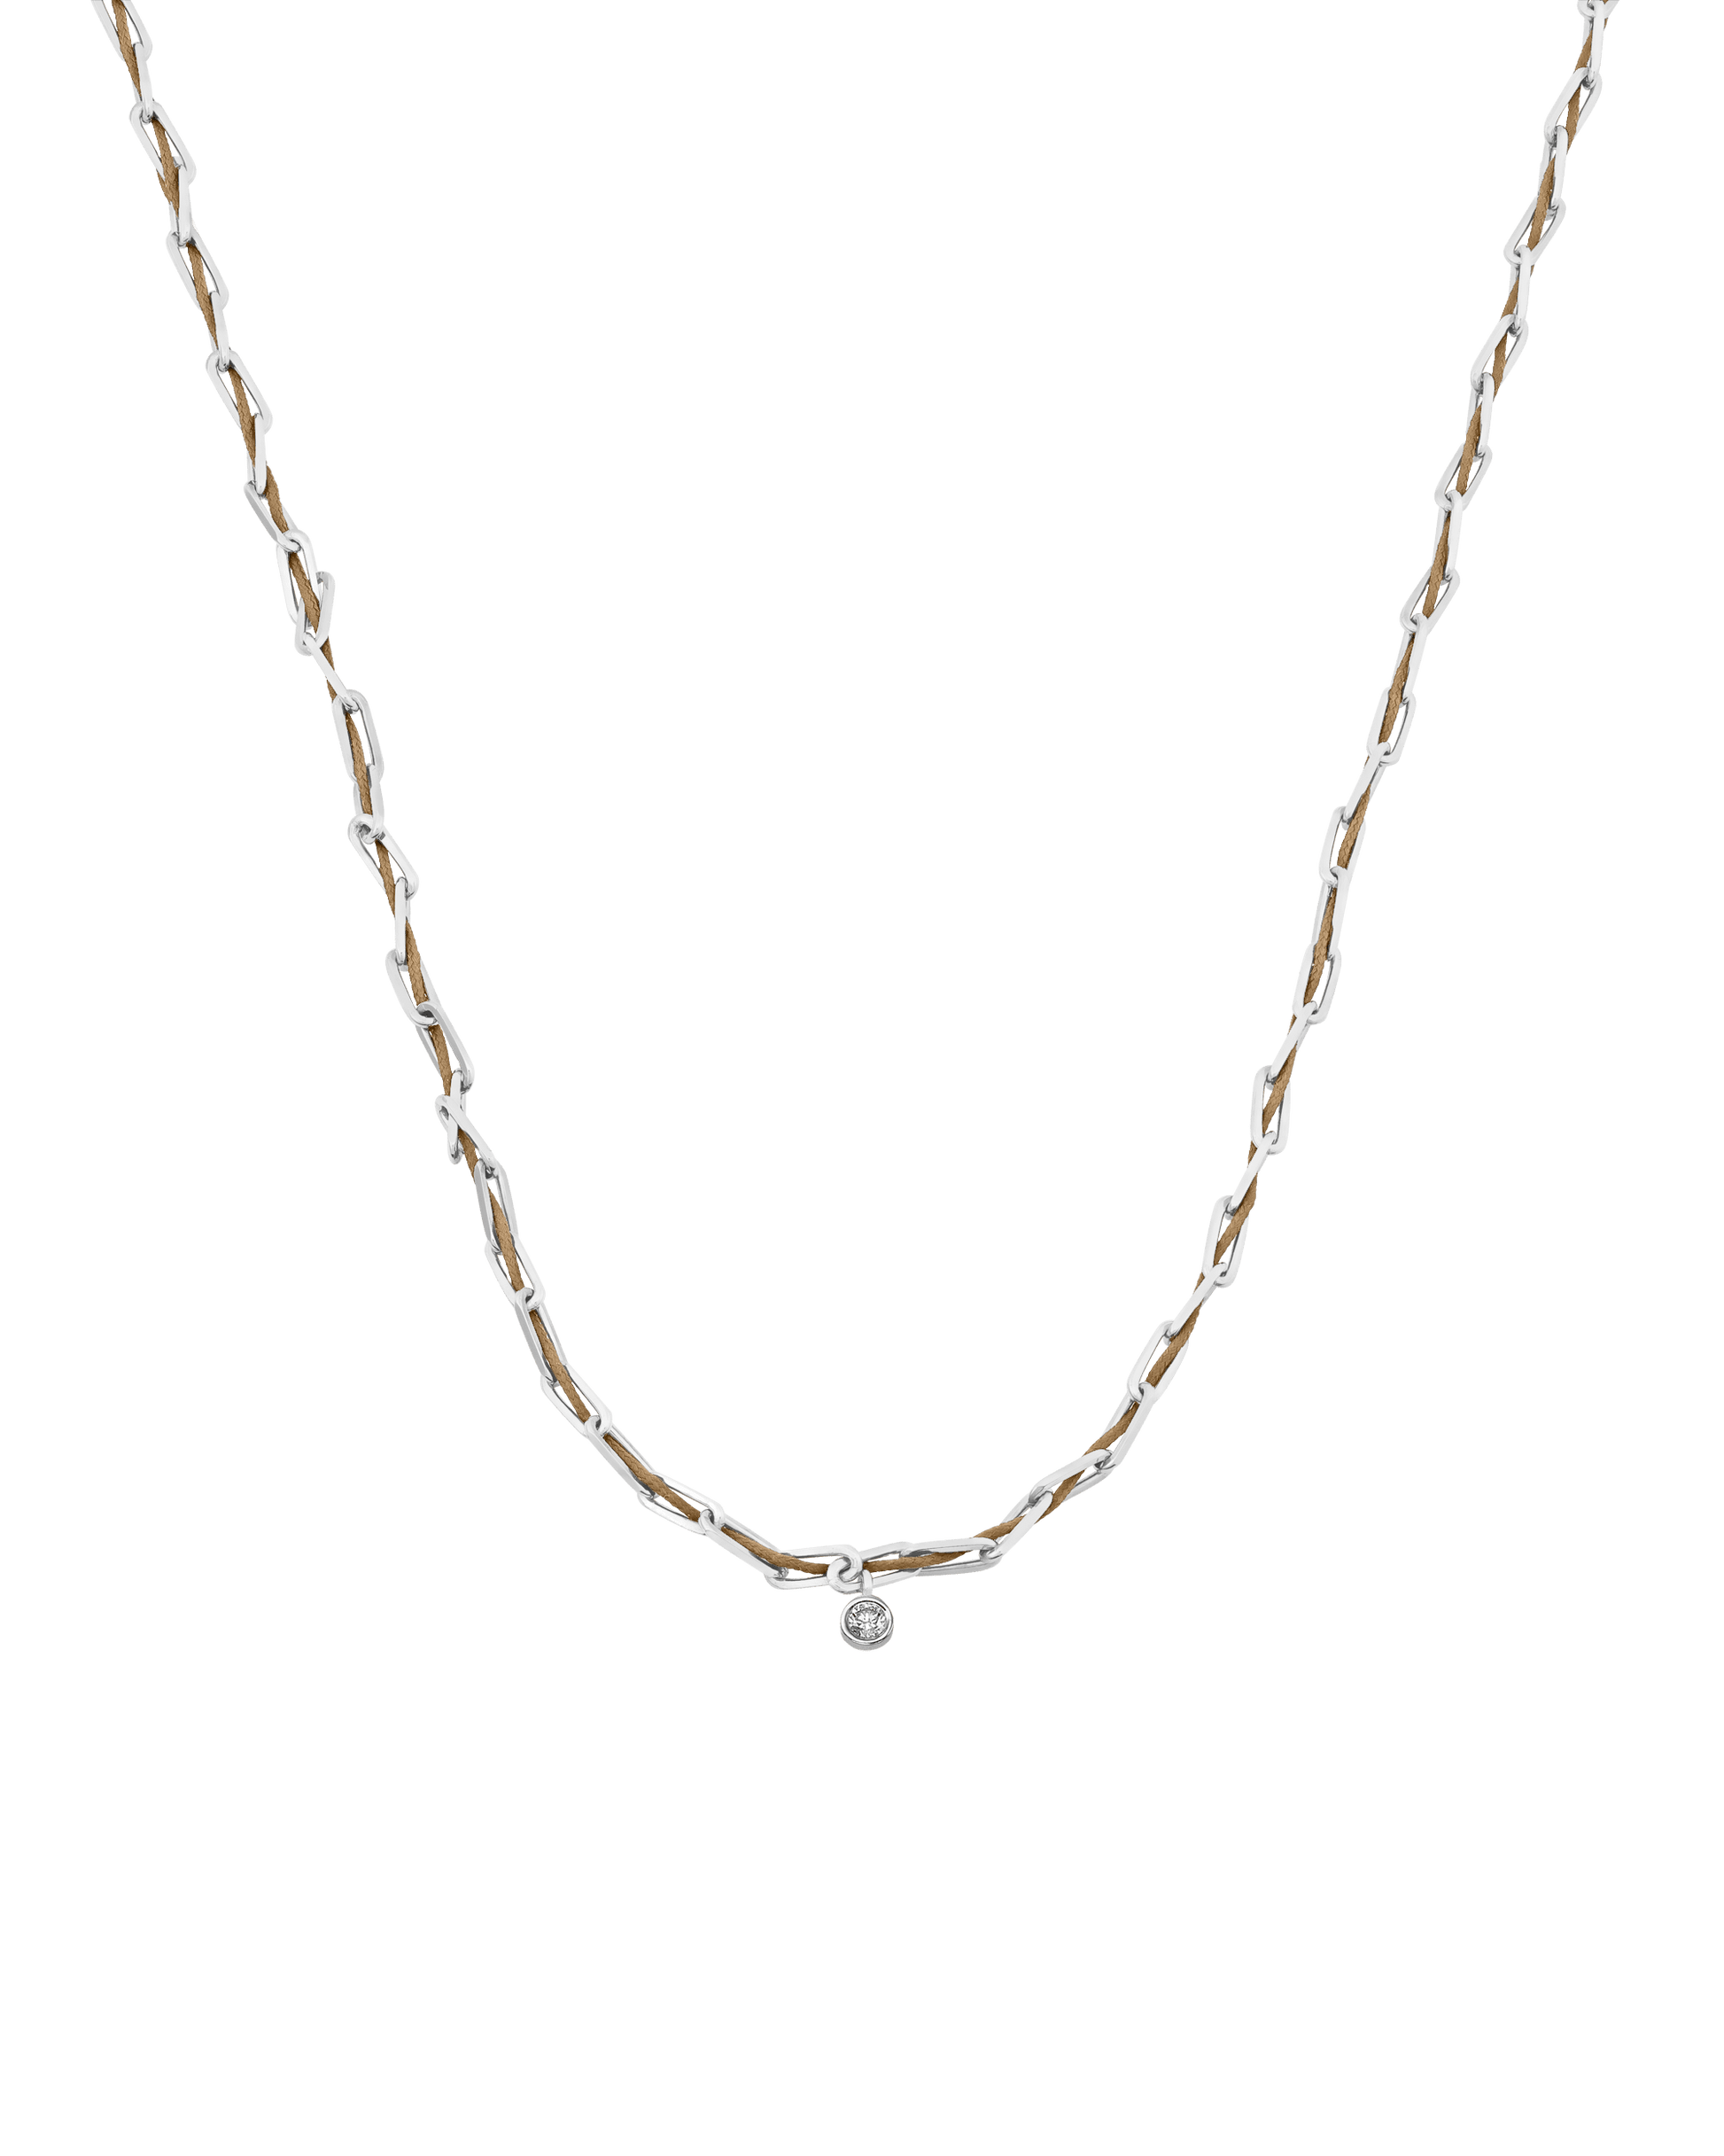 Twine Diamond Necklace - 925 Sterling Silver Necklaces magal-dev Camel Large: 0.10ct 16"